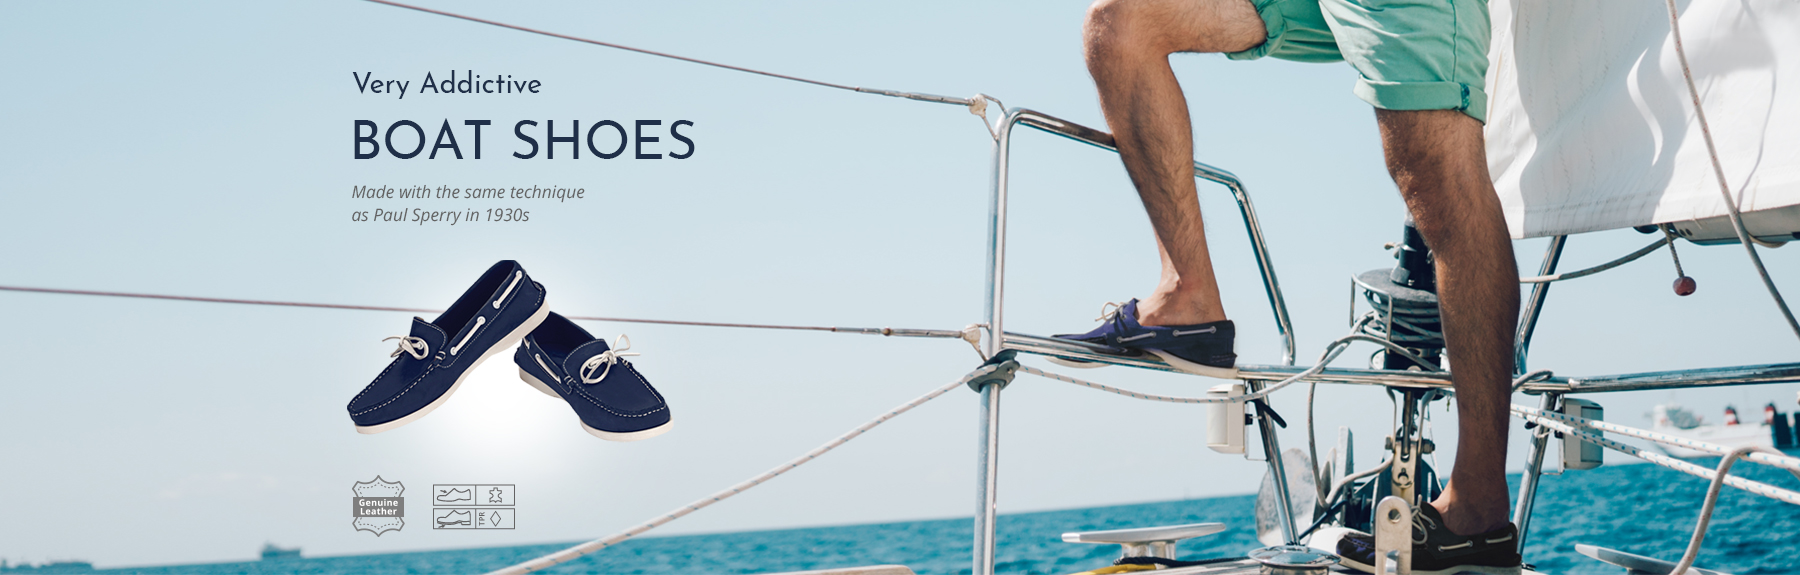 Classic Genuine Leather Handsewn Boat Shoes